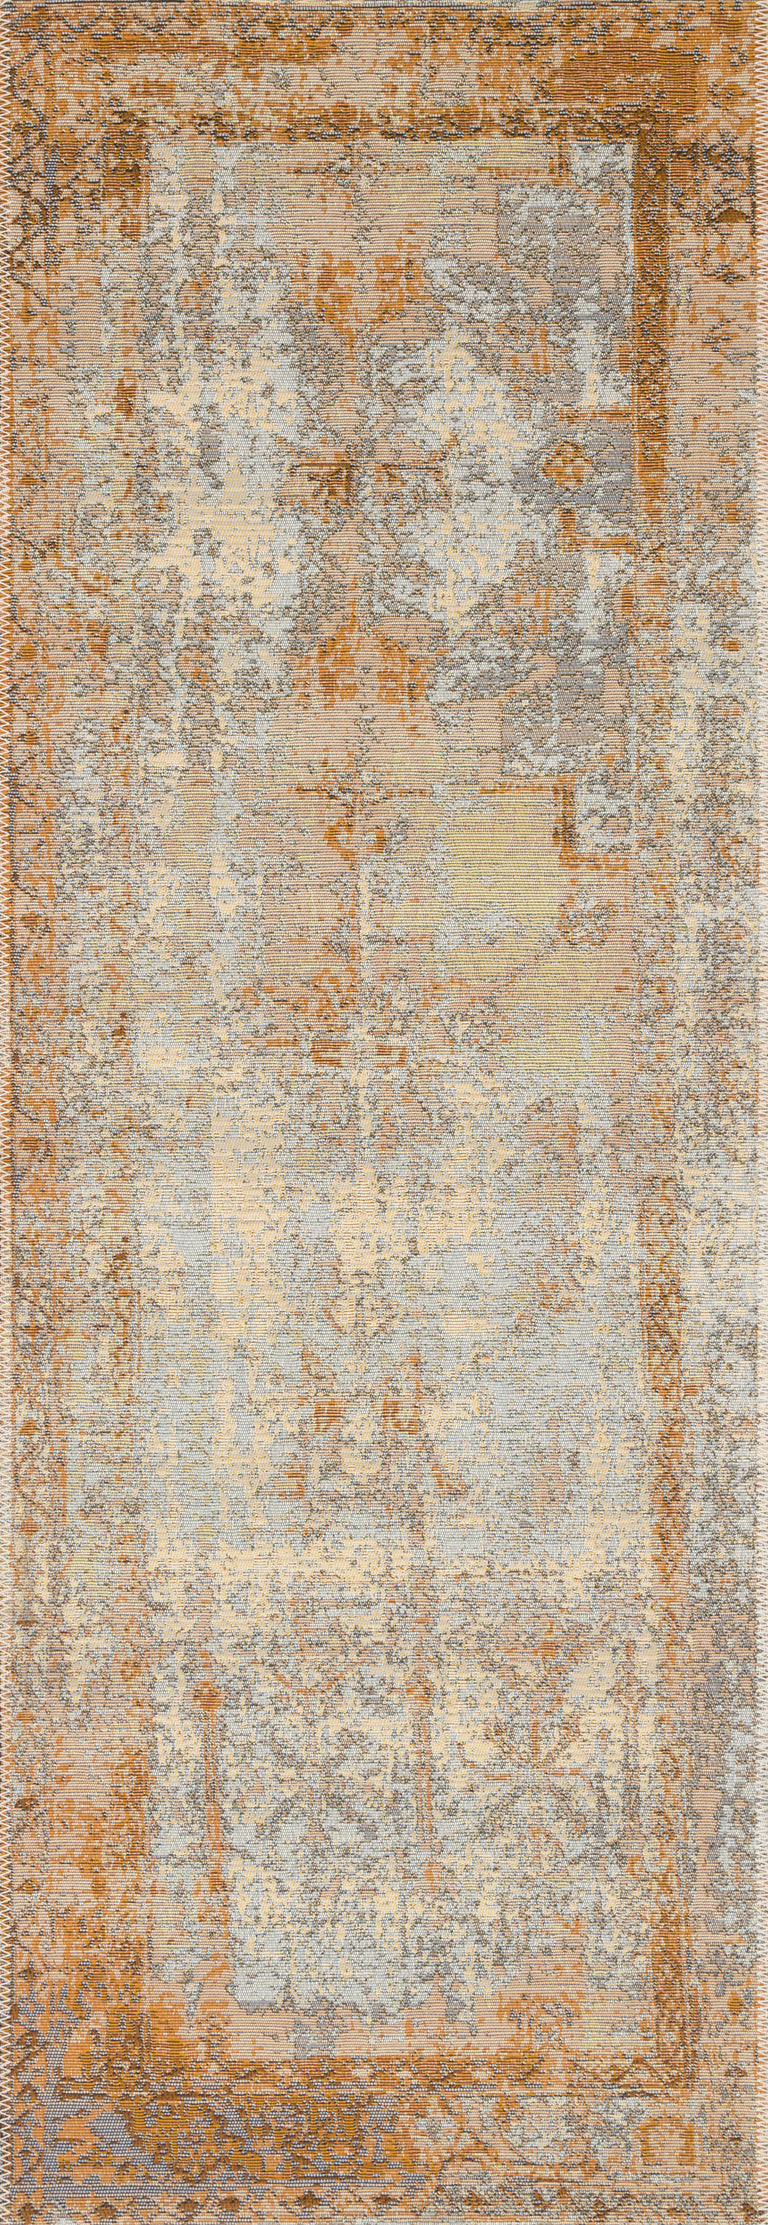 Loloi Rugs Mika Collection Rug in Ant. Ivory, Copper - 10'6" x 13'9"